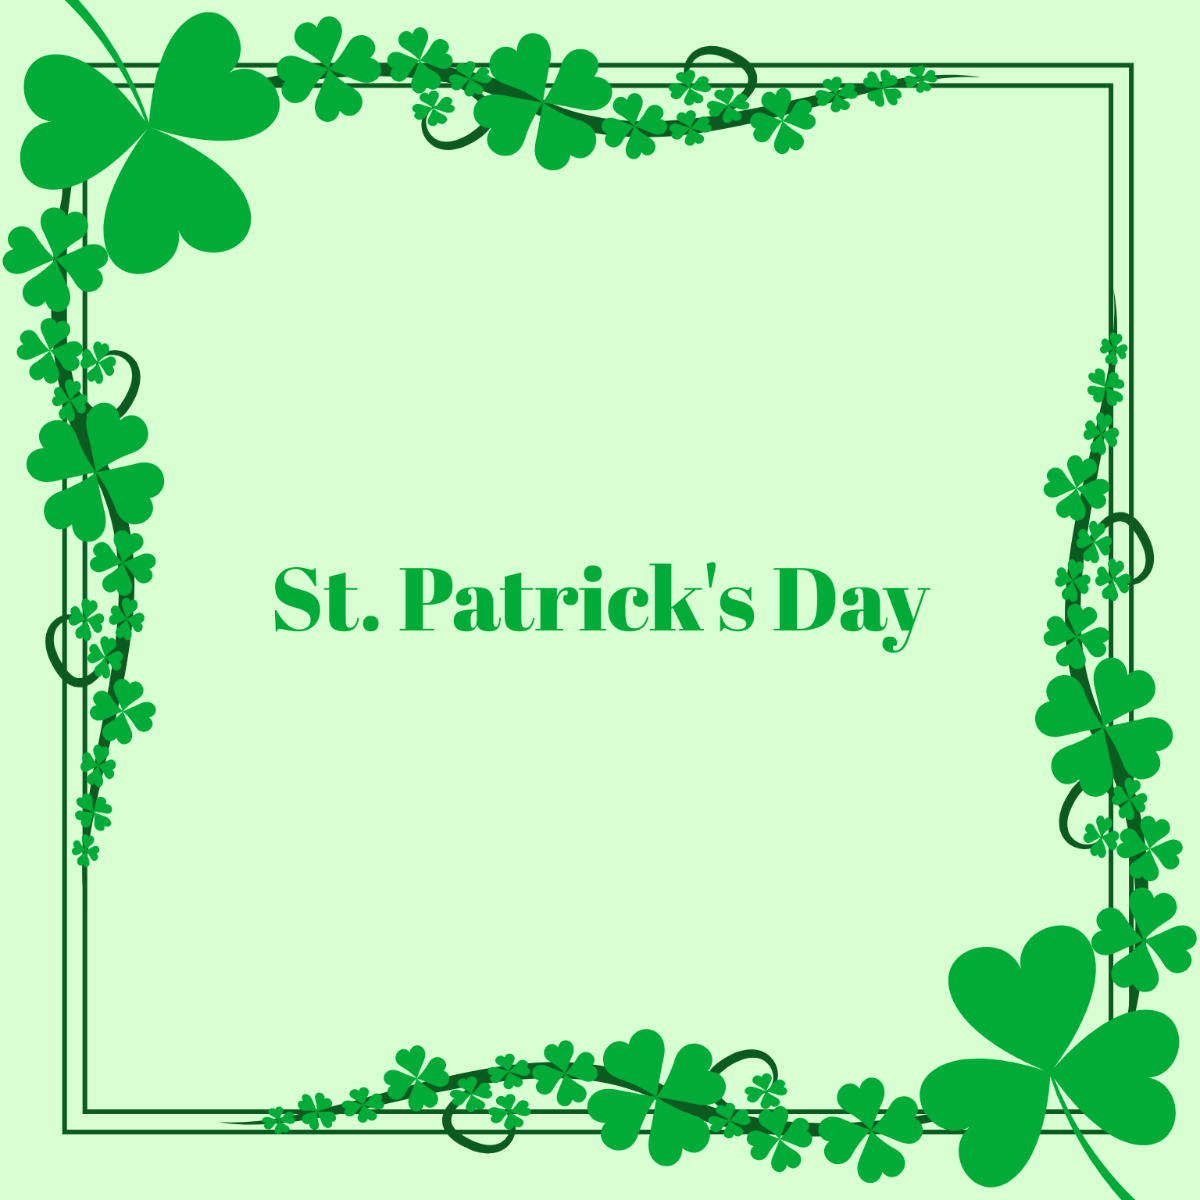 St. Patrick's Day Border Vector Template